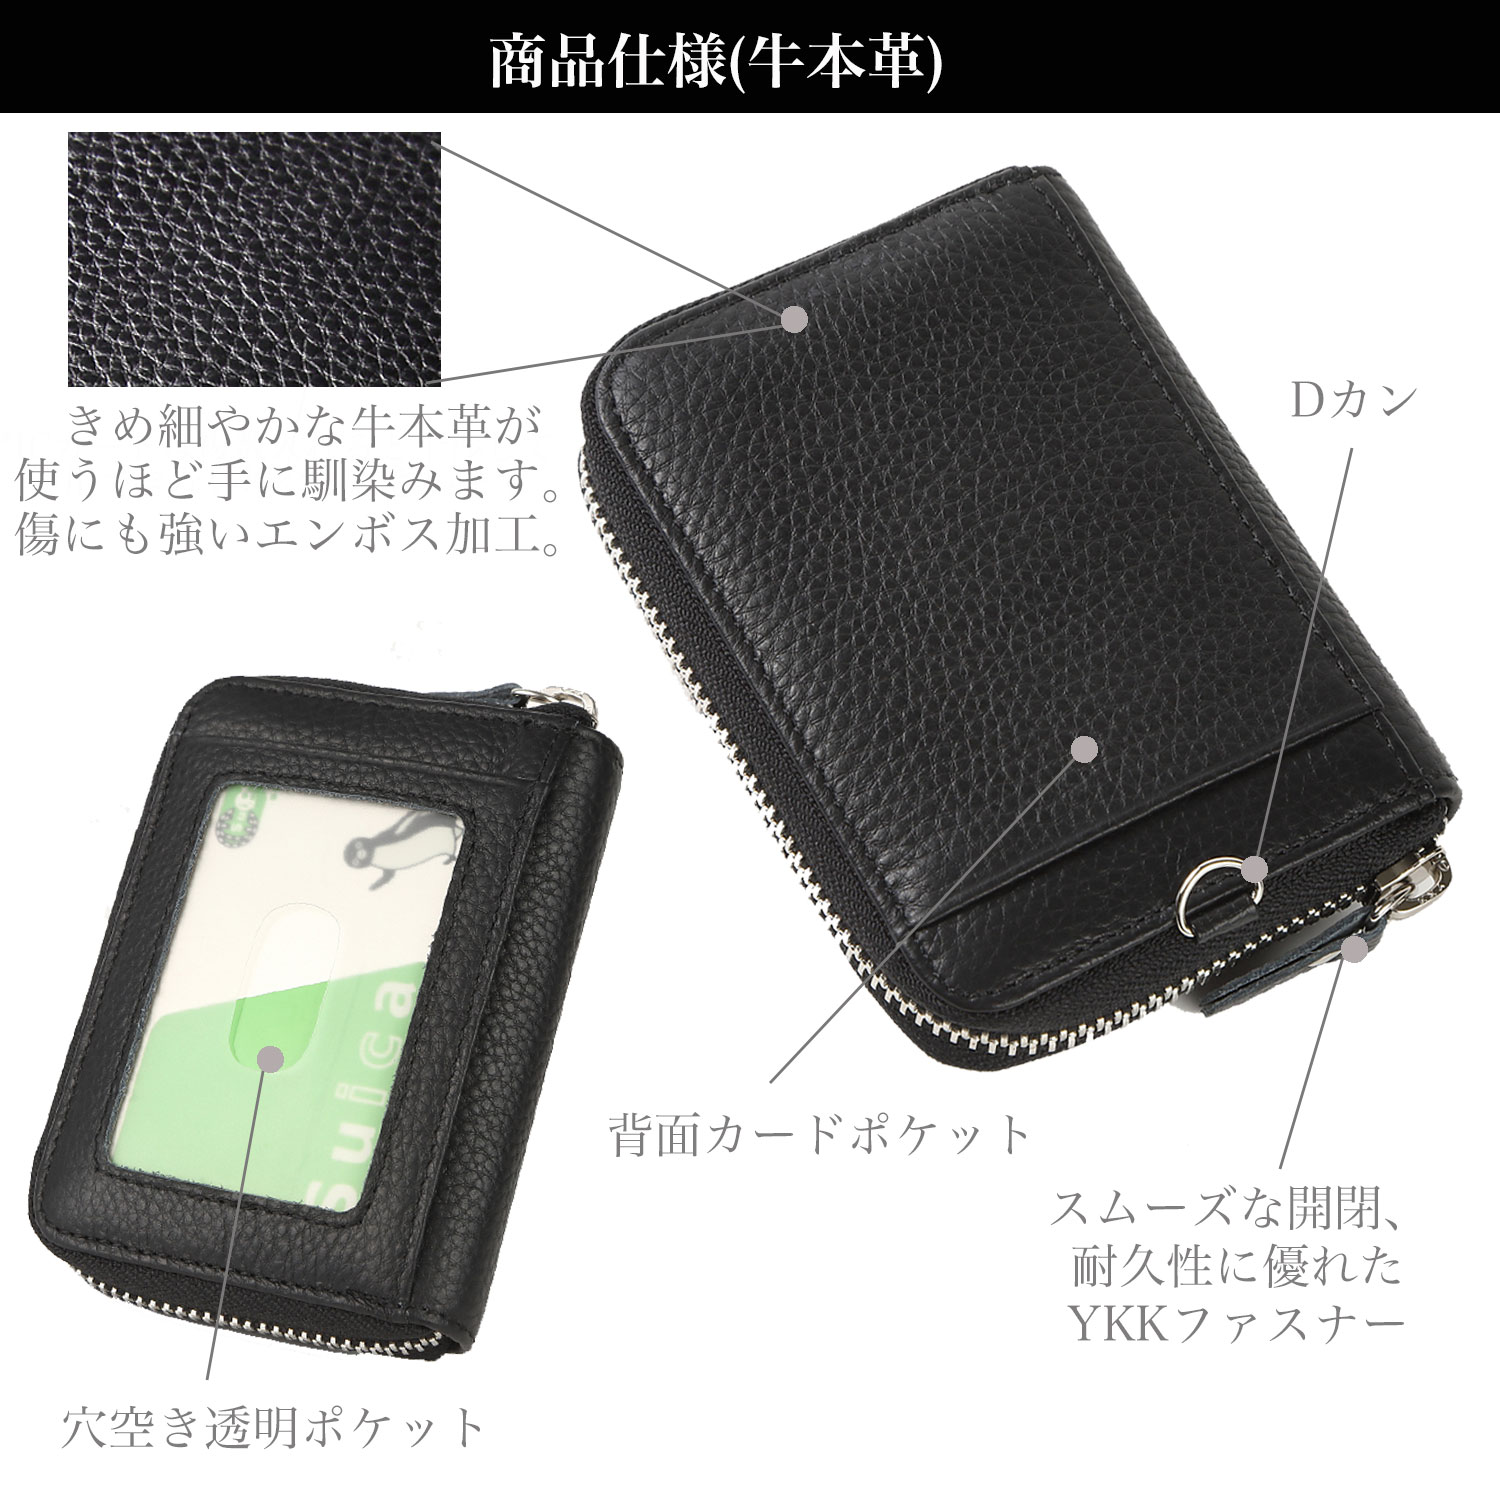  pass case change purse . men's lady's reel attaching purse coin case leather original leather both sides IC inserting ticket holder 